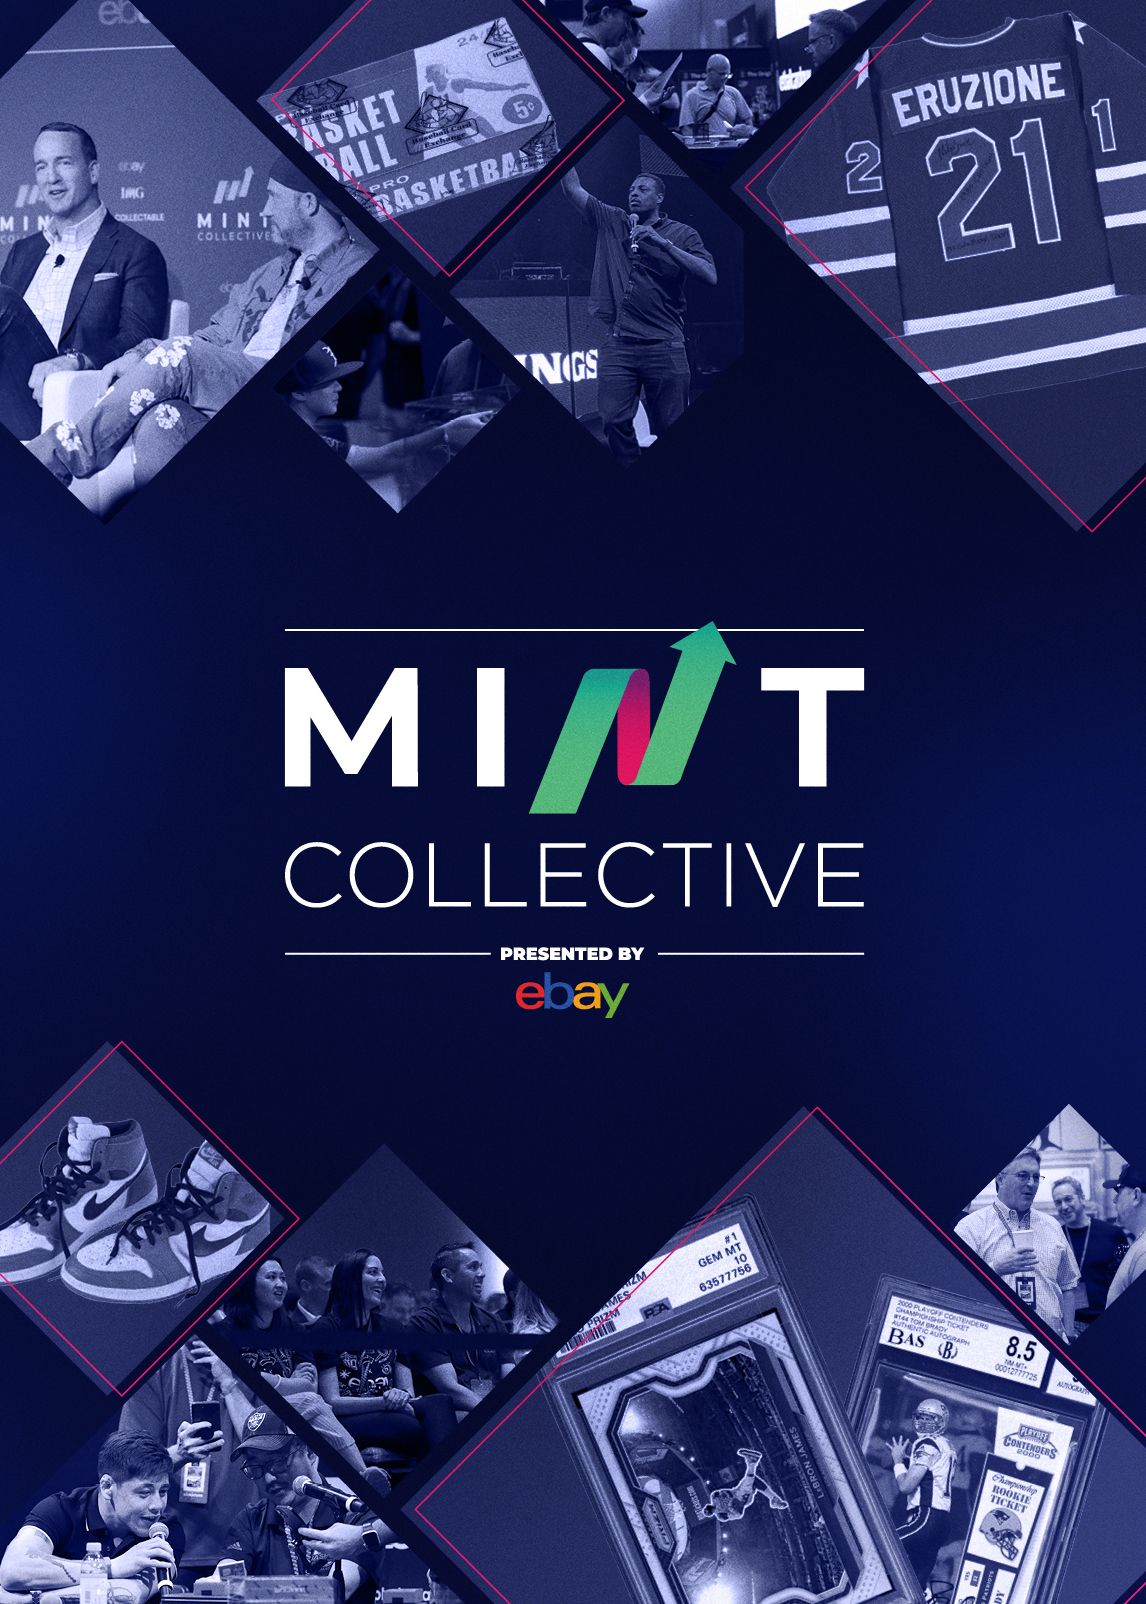 The MINT Collective Tickets at MGM Grand in Las Vegas by The Mint